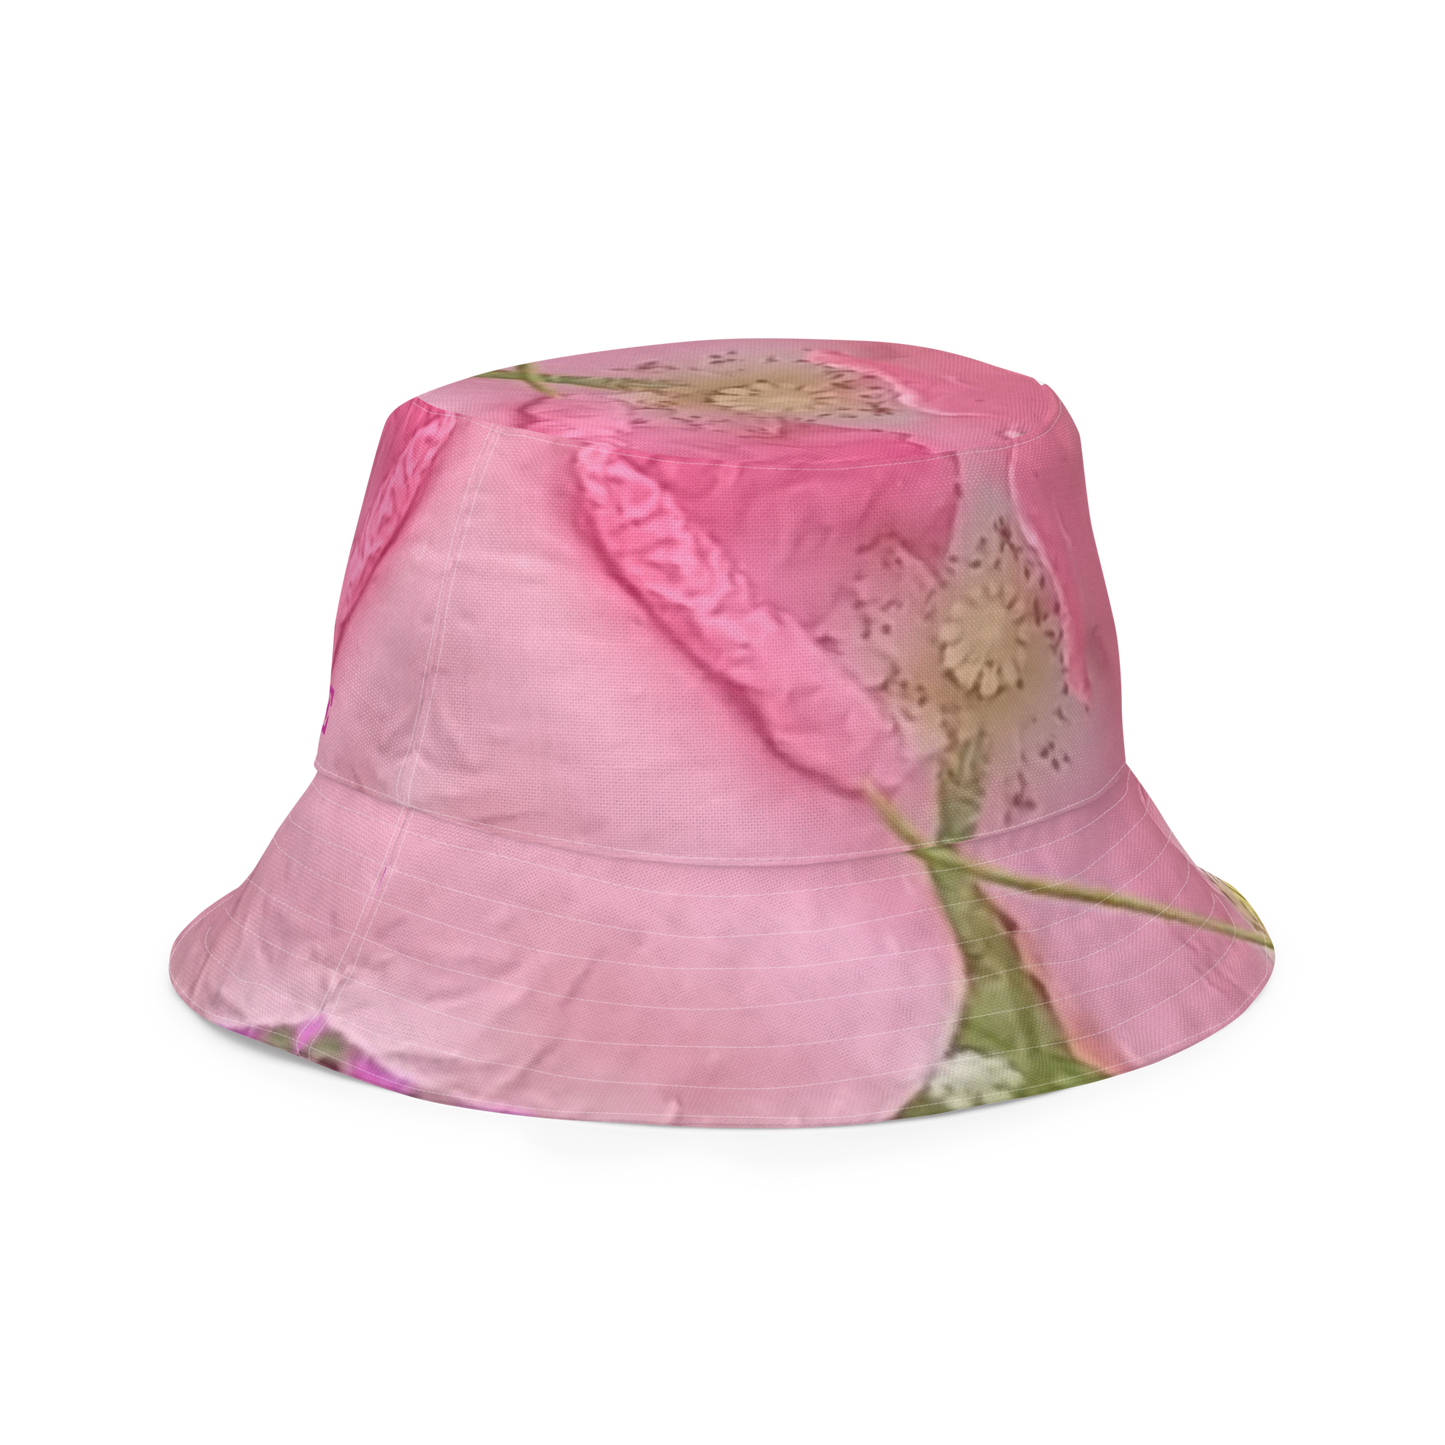 The FLOWER LOVE Collection - "Pretty Pink Poppies" Design Premium Reversible Bucket Hat - Pink Inside - Beach Hat, Gifts for Her